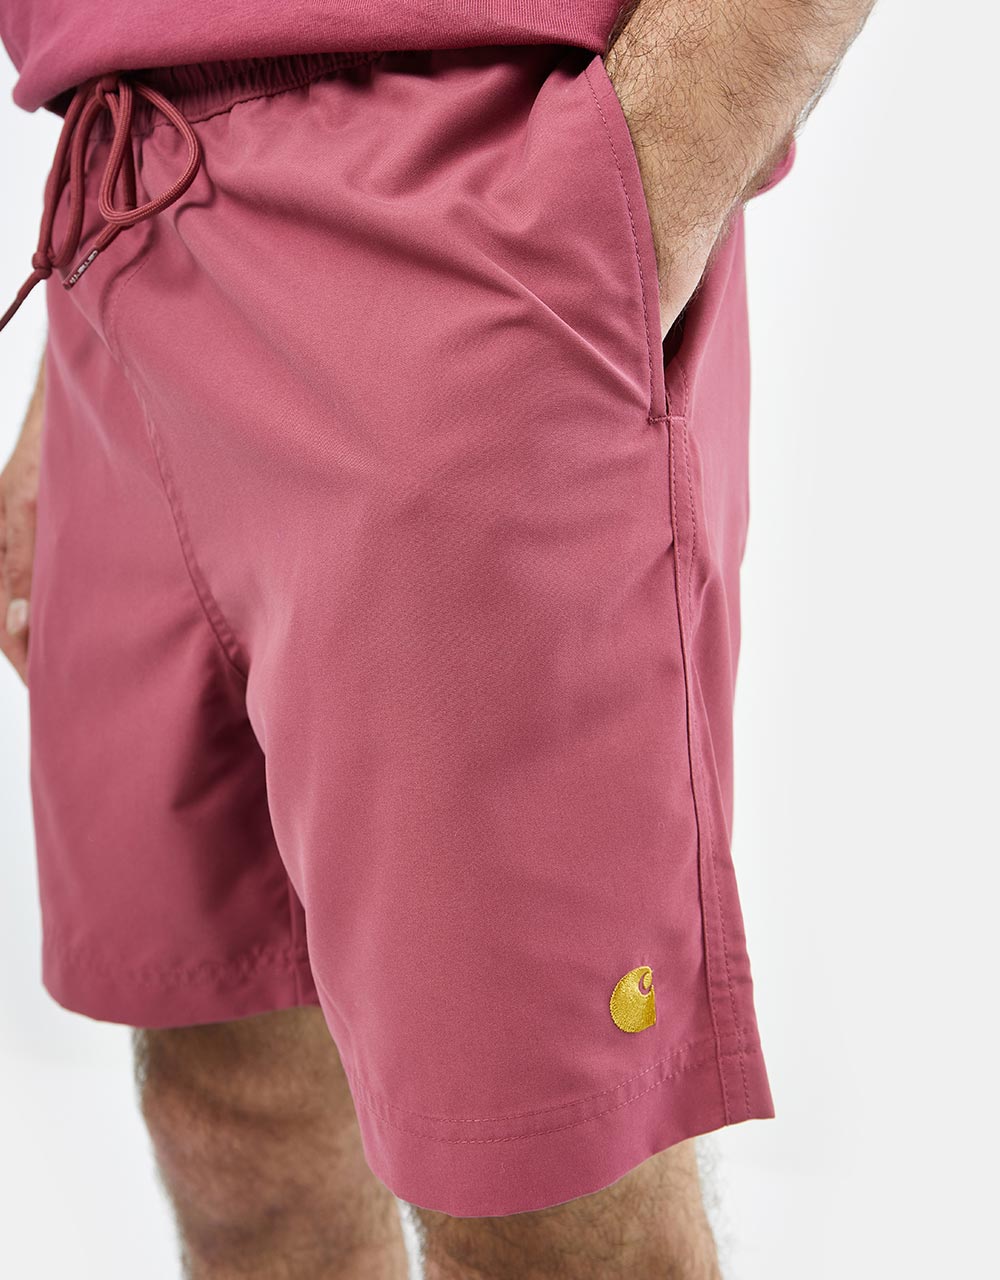 Carhartt WIP Chase Swim Trunk - Punch/Gold